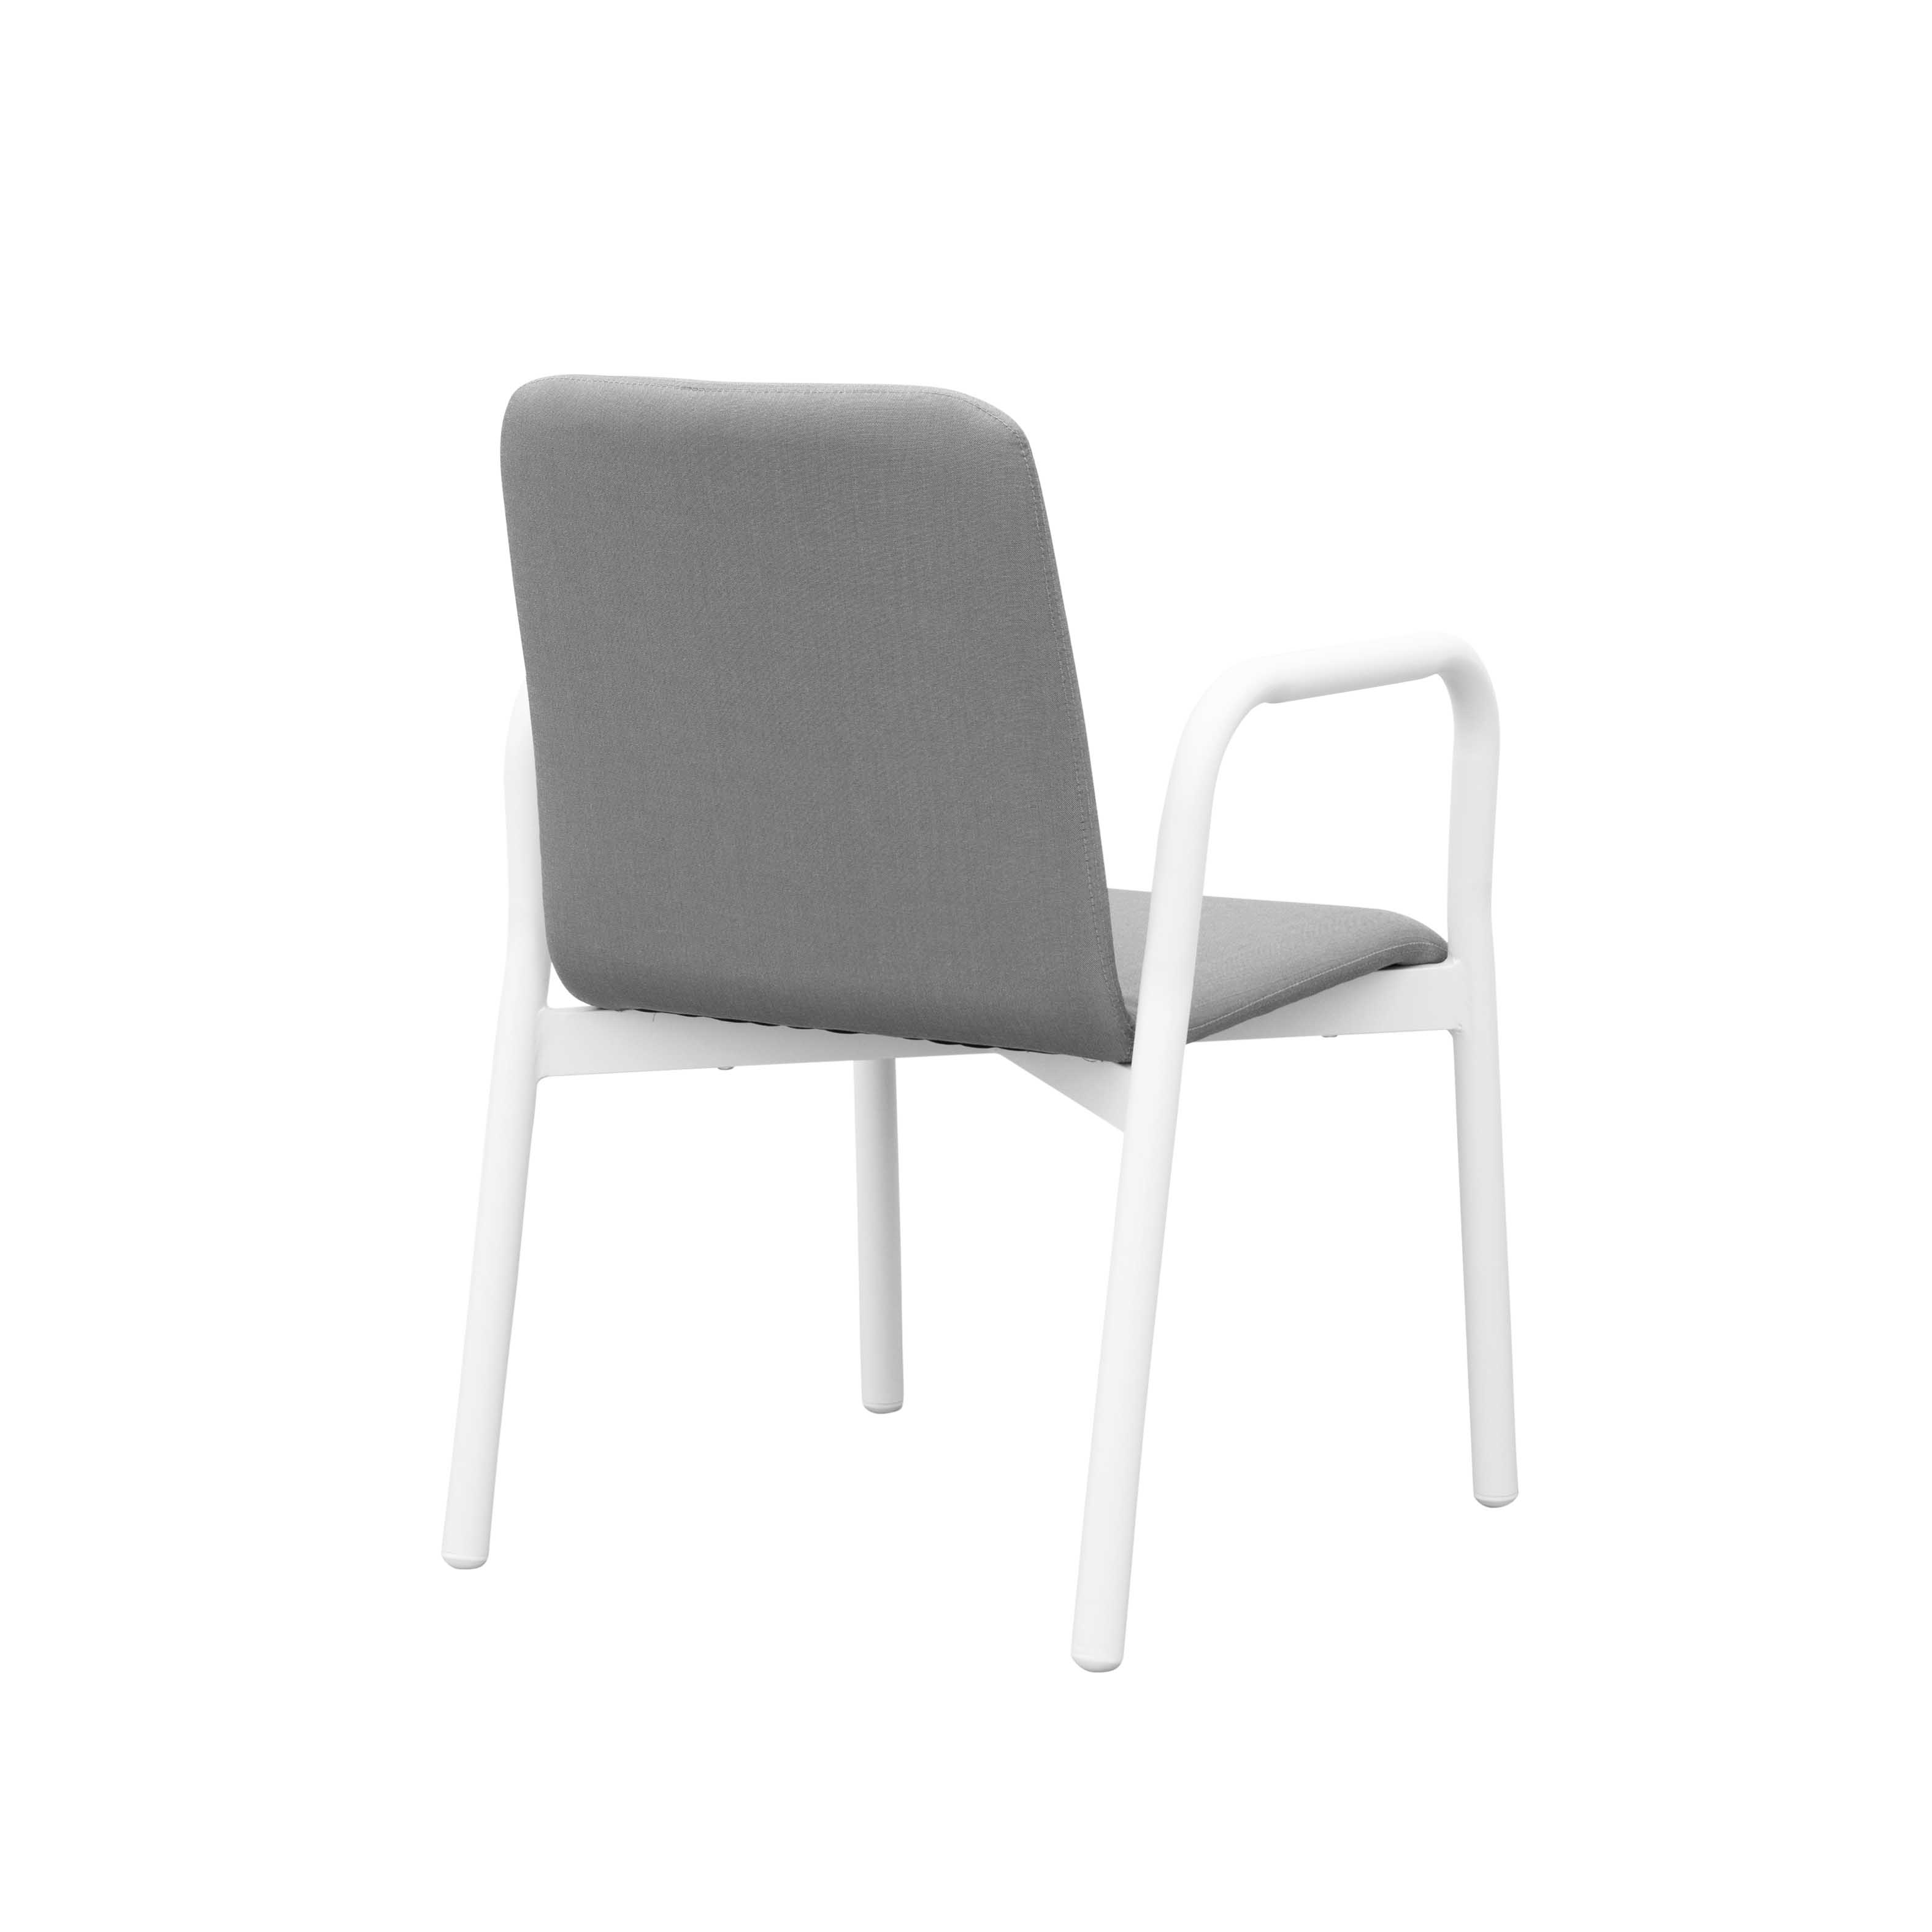 Houston fabric dining chair S2